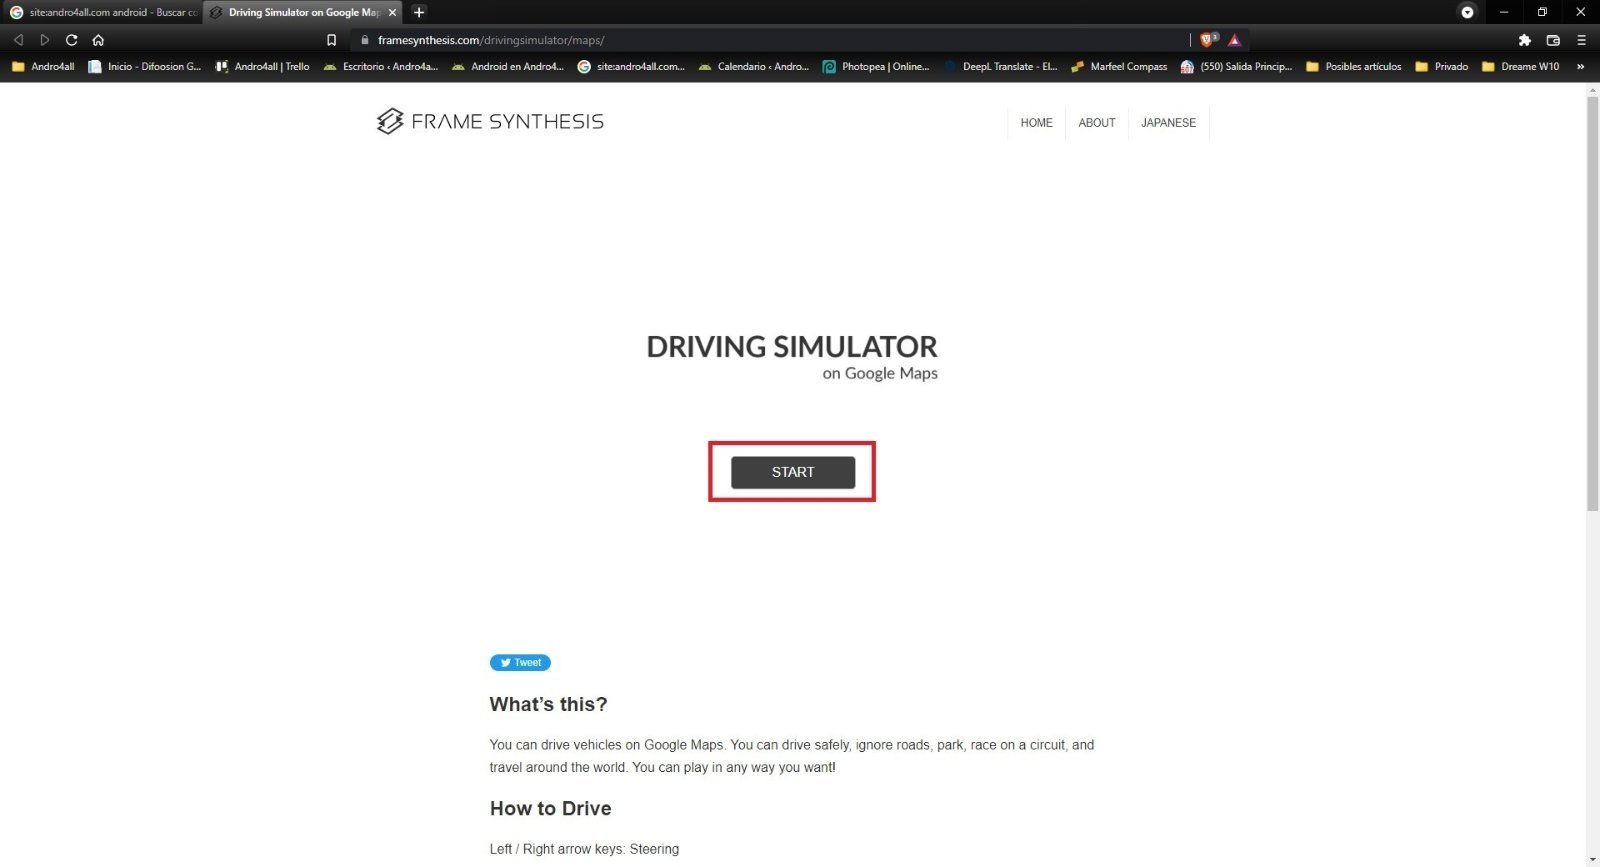 With this website you can simulate that you are driving on Google Maps anywhere in the world